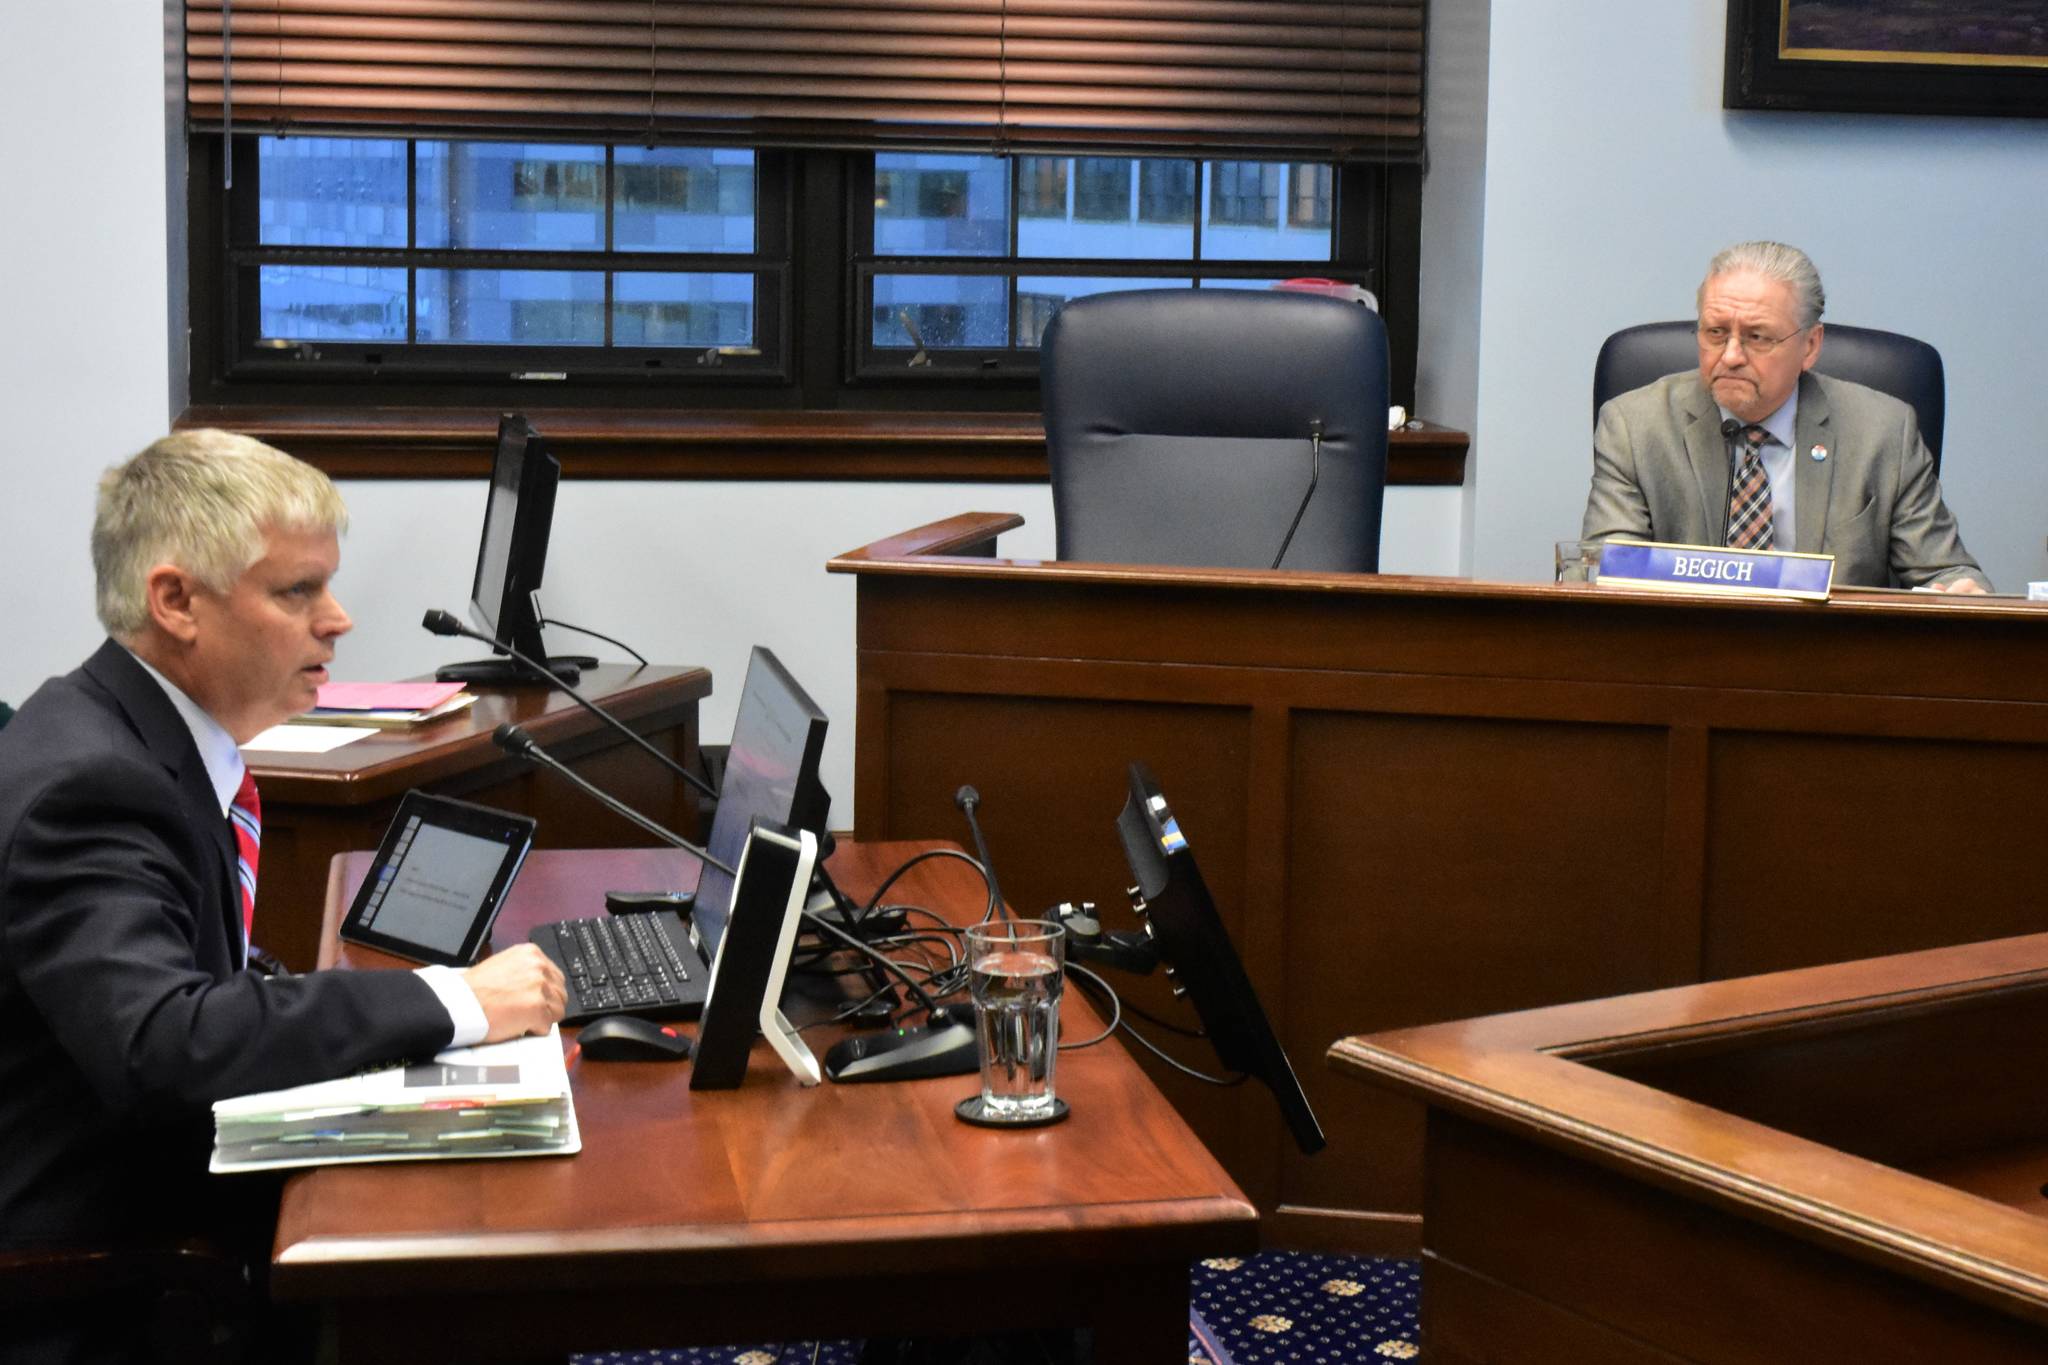 Bob Griffin, senior education research fellow from the Alaska Policy Forum, left, and Sen. Tom Begich, D-Anchorage, at a Senate Education Committee meeting on Tuesday, Feb. 4, in Juneau. (Peter Segall | Juneau Empire)